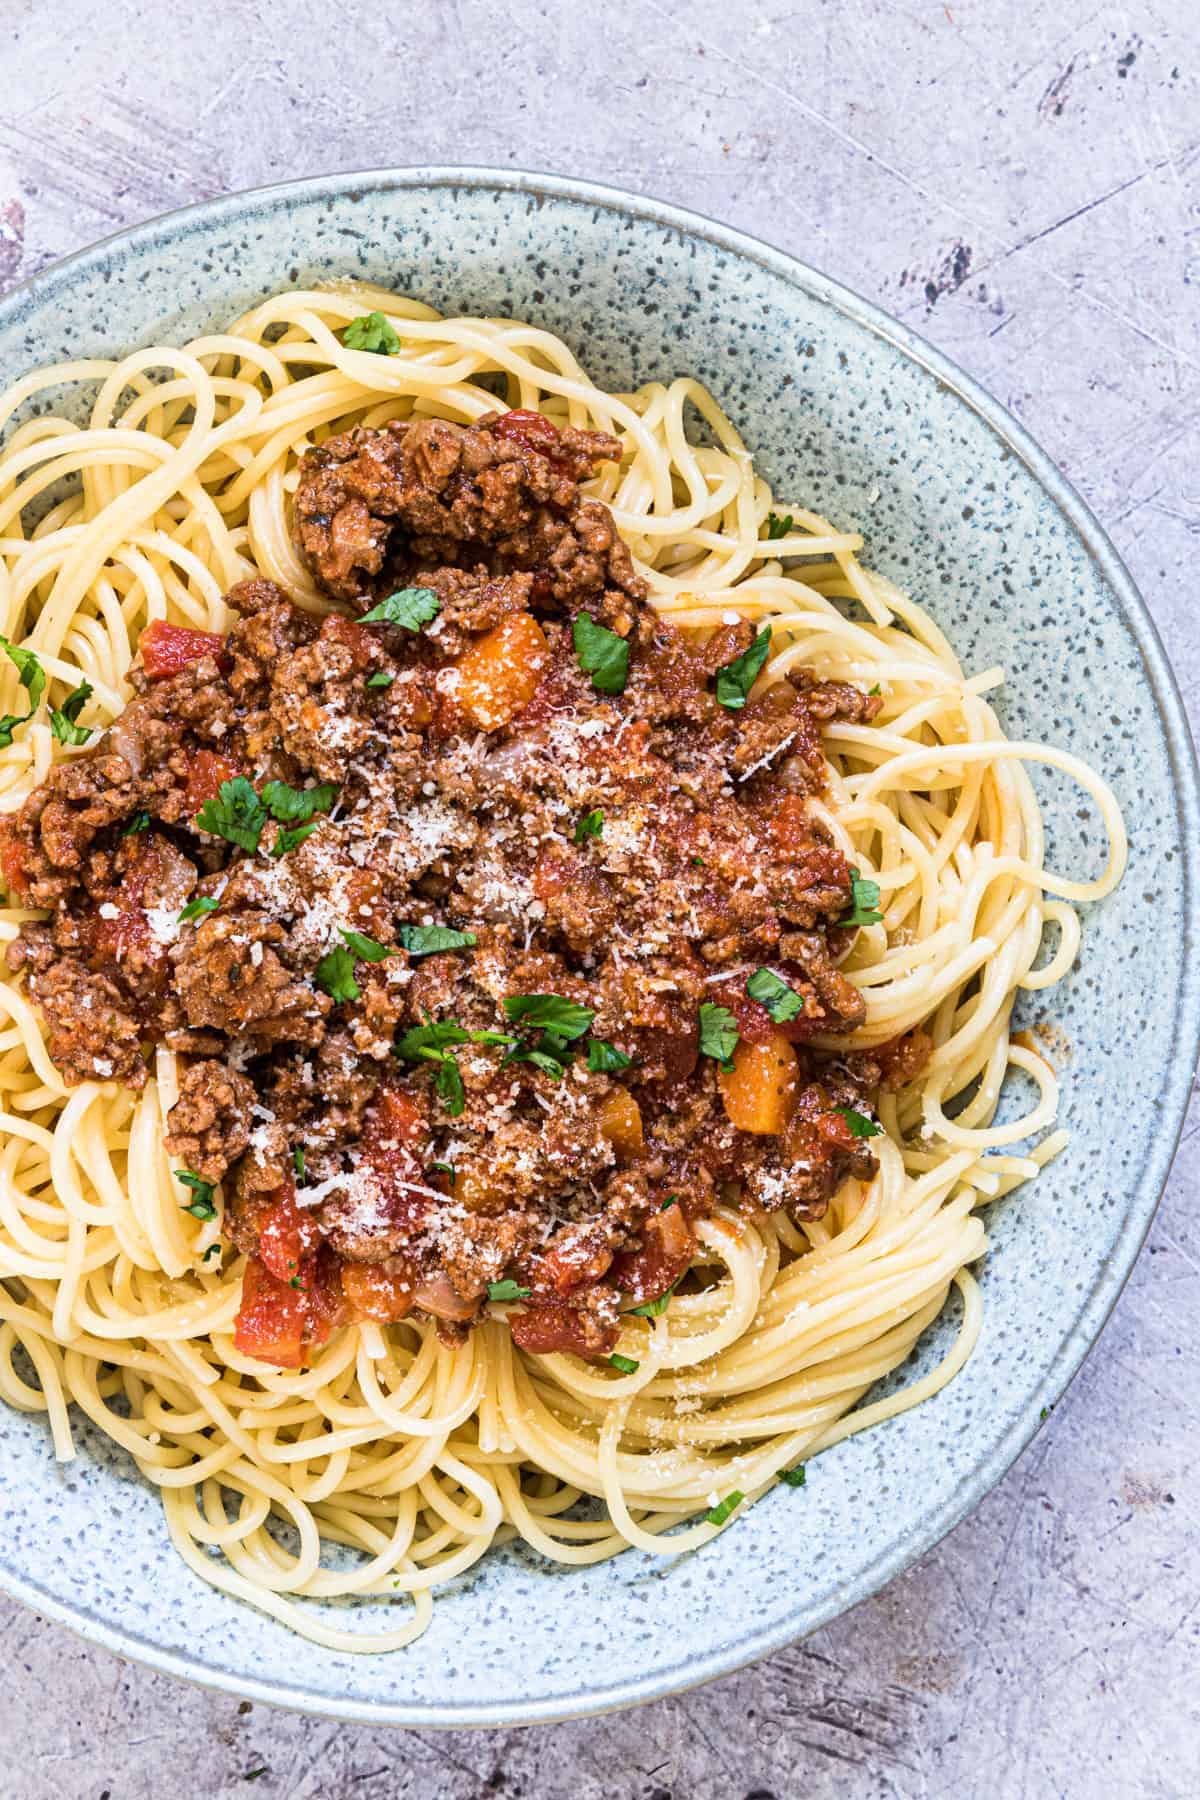 Pasta with bolognese sauce on a grey spotted plate.